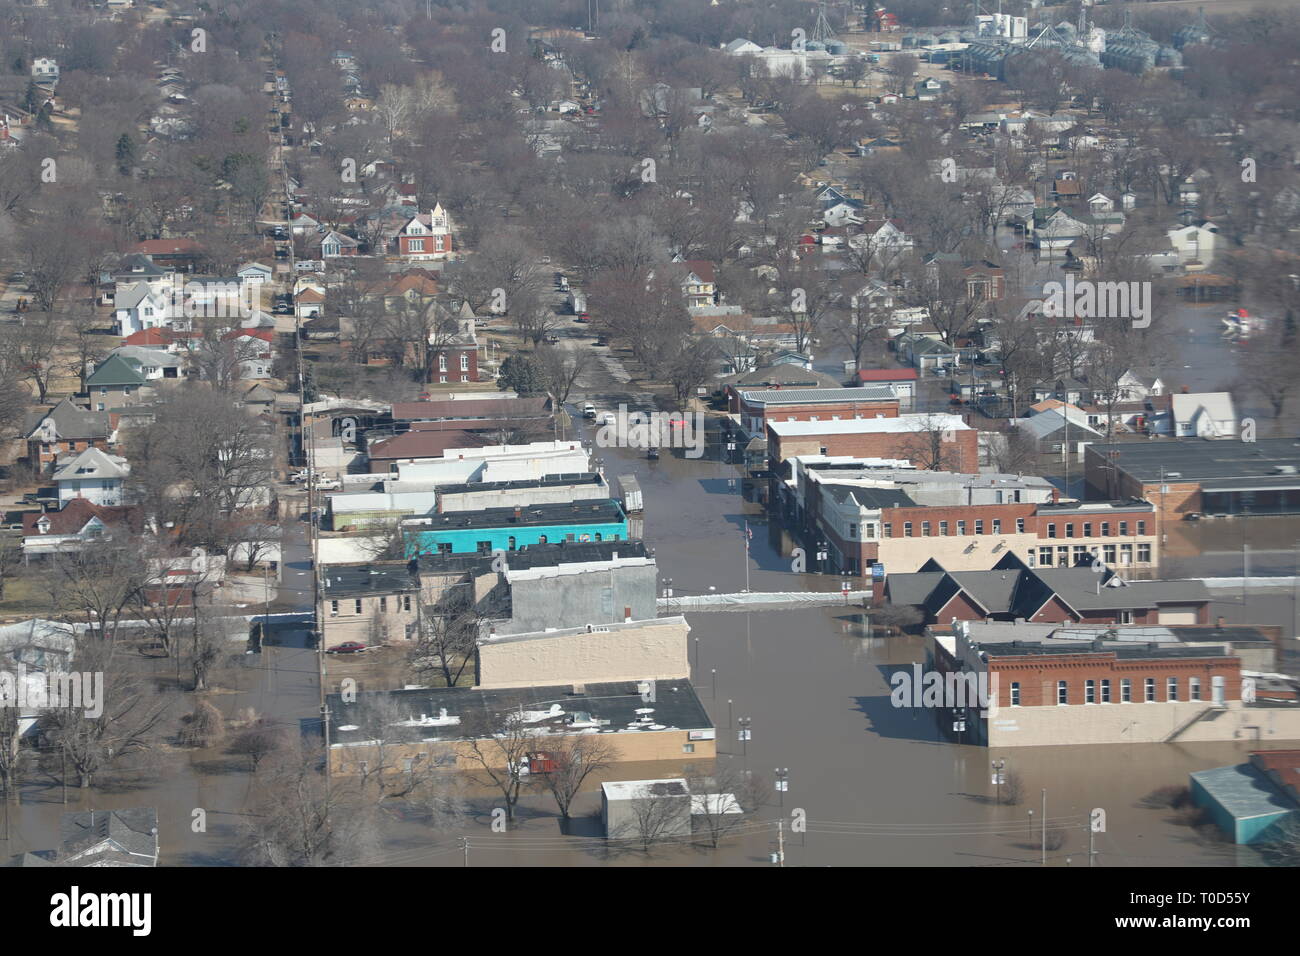 The majority of Hamburg, Iowa is covered in flood waters after an unprecedented unregulated water flow from the Platte and Elkhorn Rivers.  Water levels raised until many of the local levees were overtopped or breached. Stock Photo